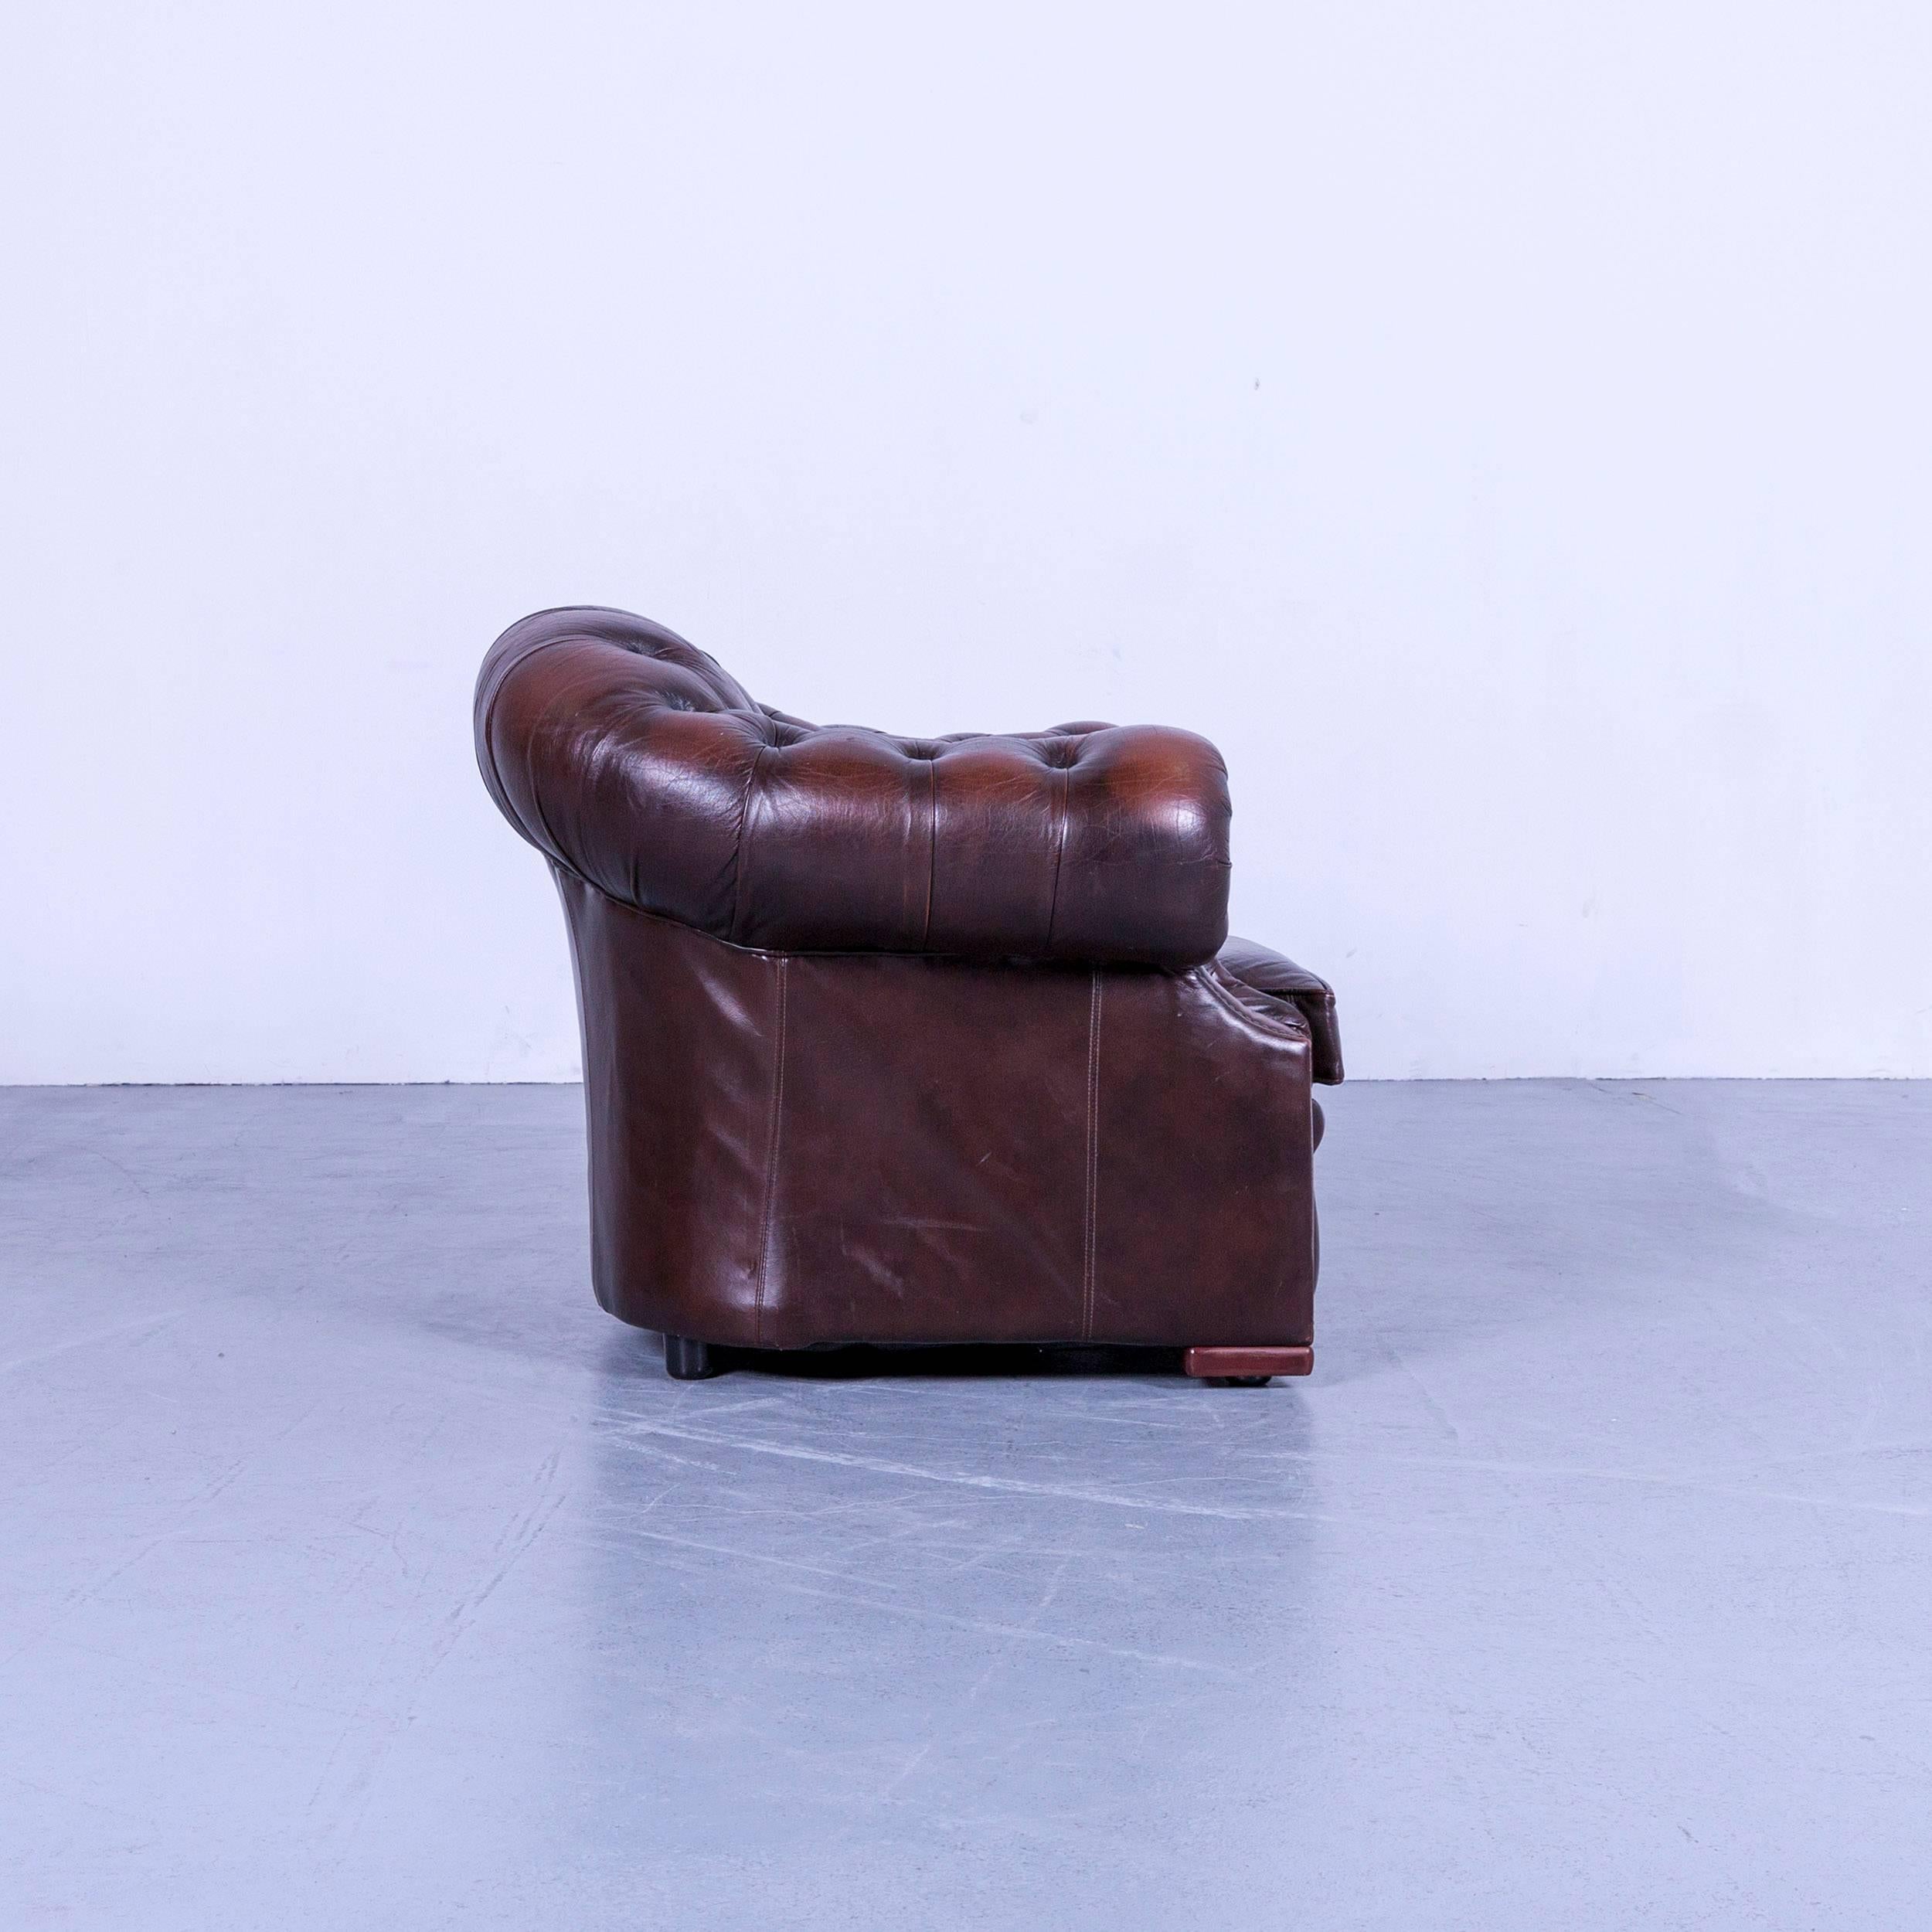 Contemporary Chesterfield Centurion Leather Armchair Brown One-Seat